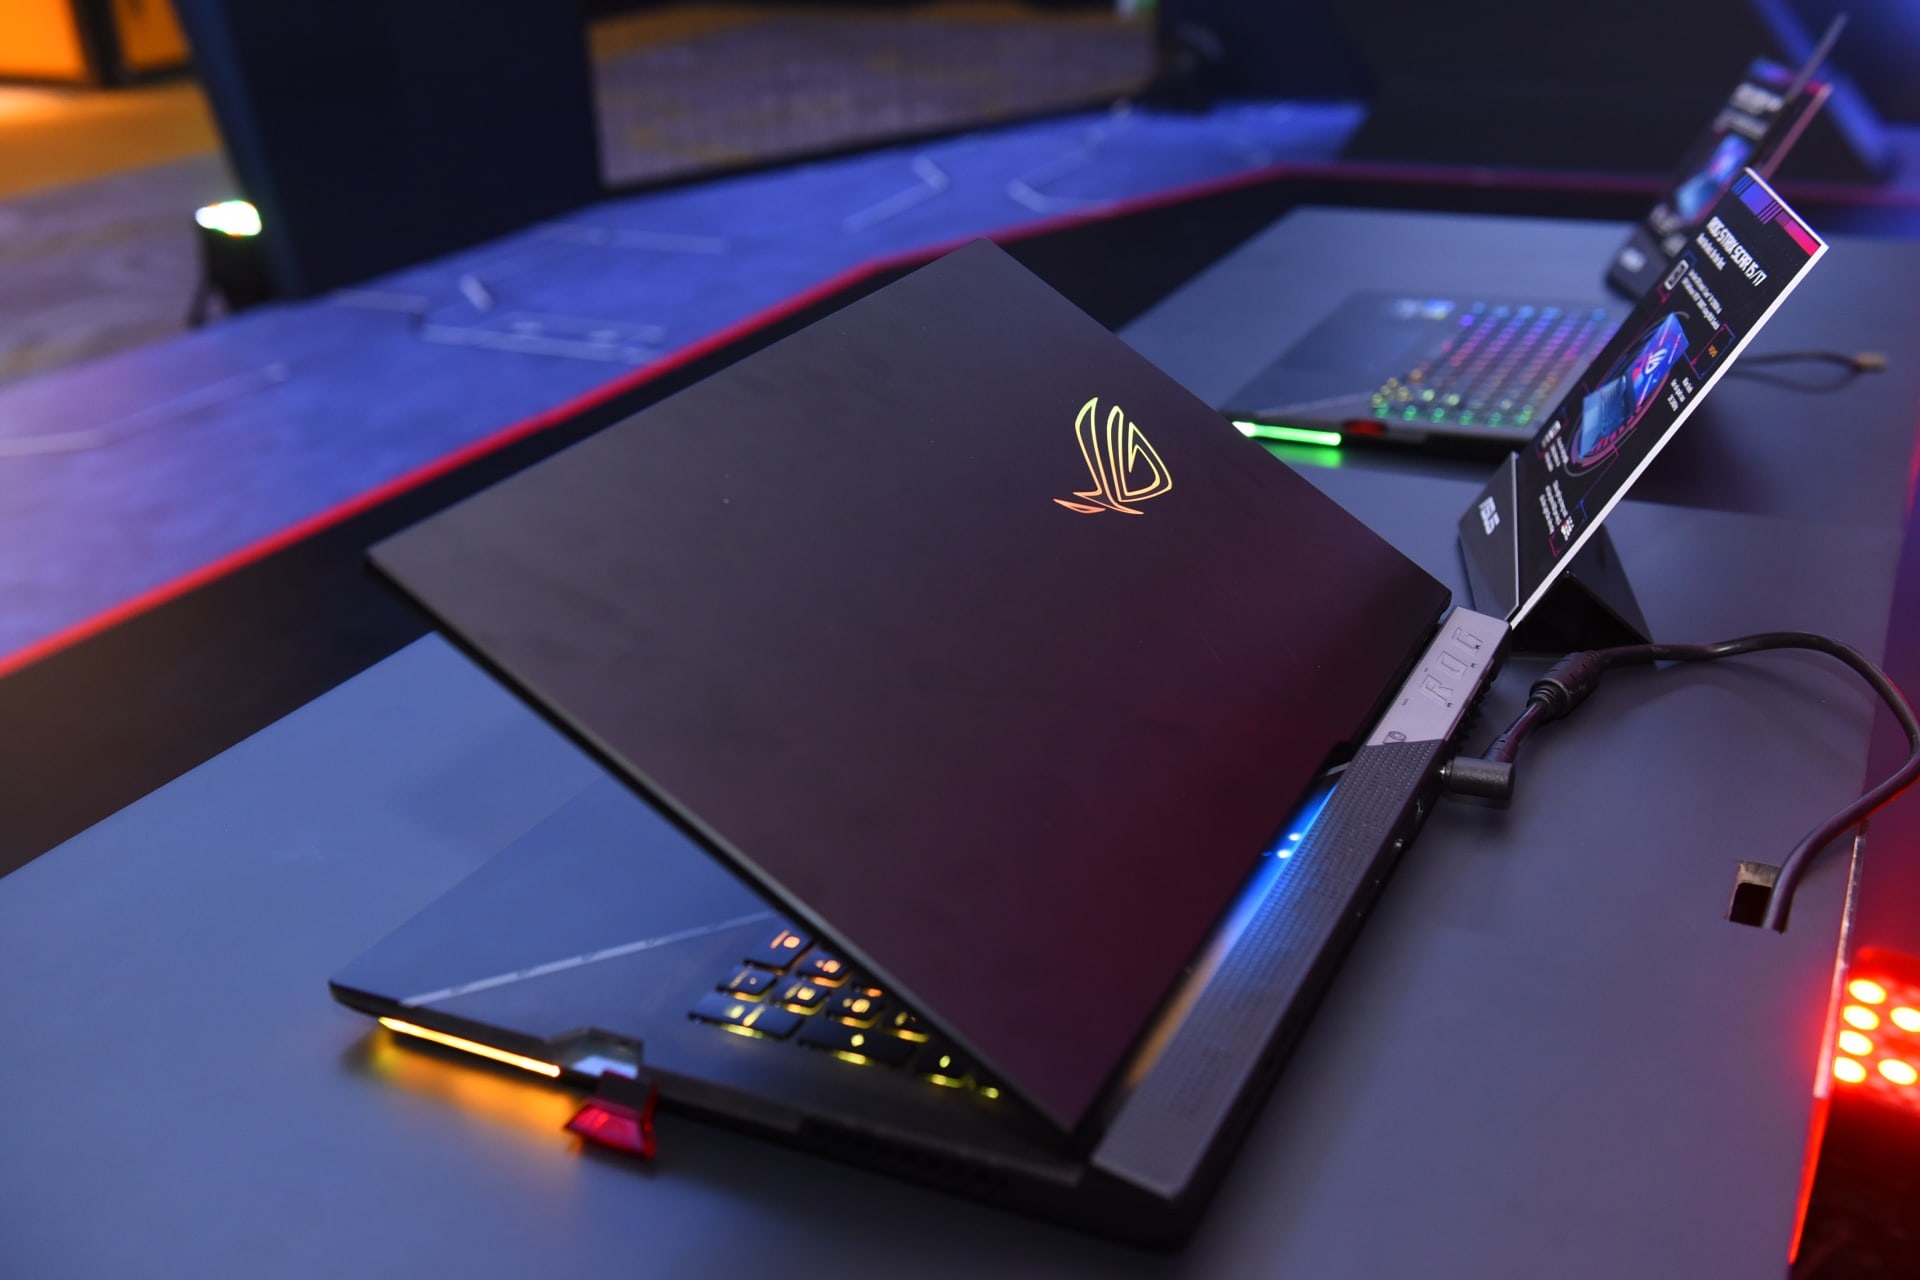 TCBC ASUS ROG khuay dao thi truong voi loat Laptop Gaming dinh dam su dung Intel the he 12 16 MMOSITE - Thông tin công nghệ, review, thủ thuật PC, gaming